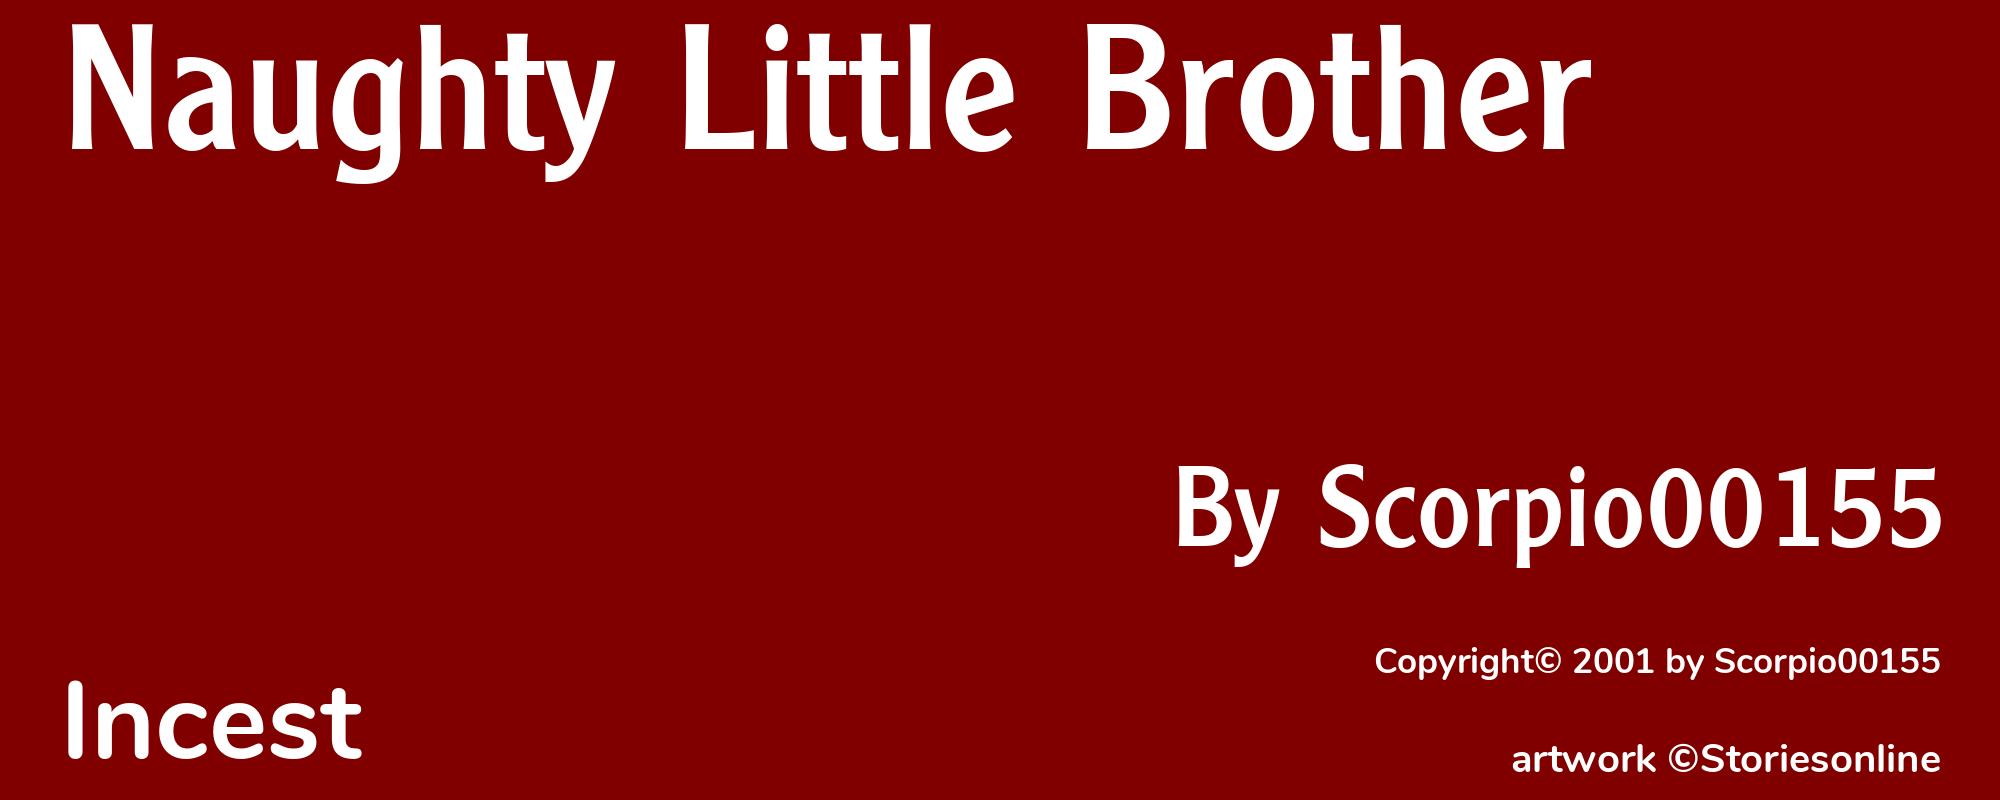 Naughty Little Brother - Cover